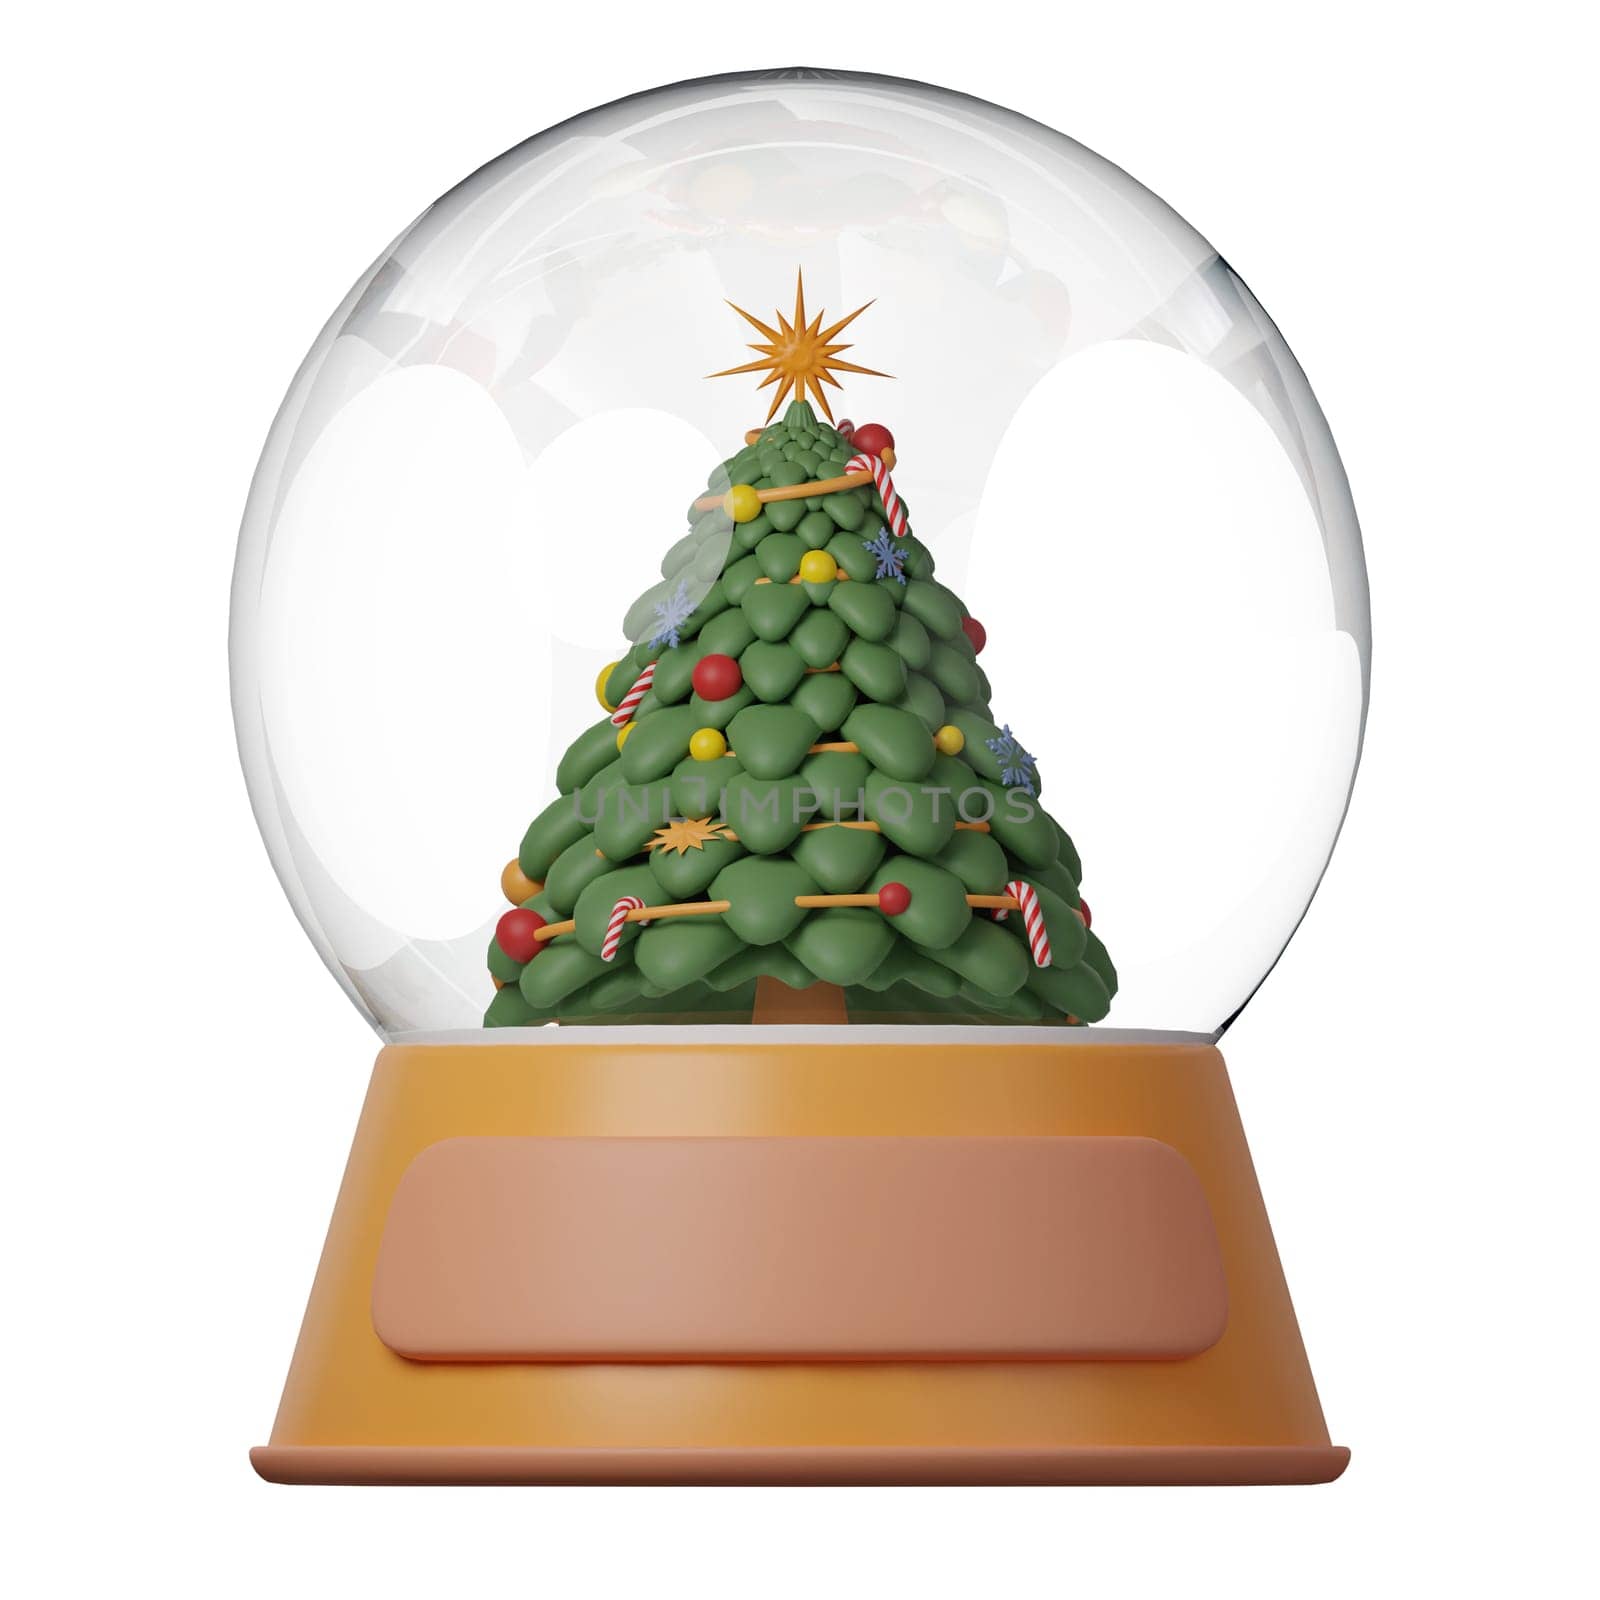 3d Christmas tree icon. minimal decorative festive conical shape tree. New Year's holiday decor. 3d design element In cartoon style. Icon isolated on white background. 3d illustration.